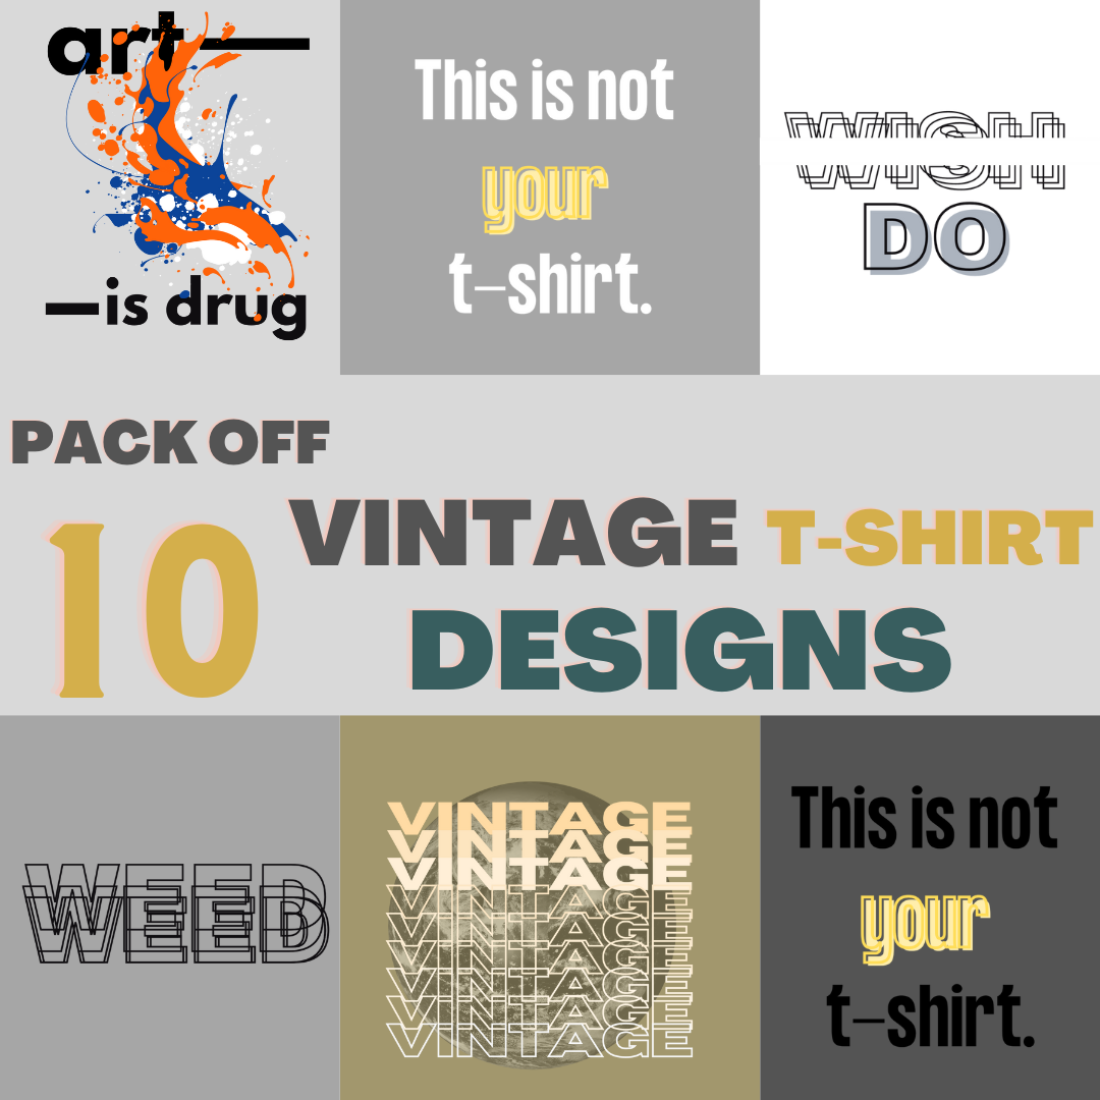 Vintage T-Shirt Typography Designs cover image.